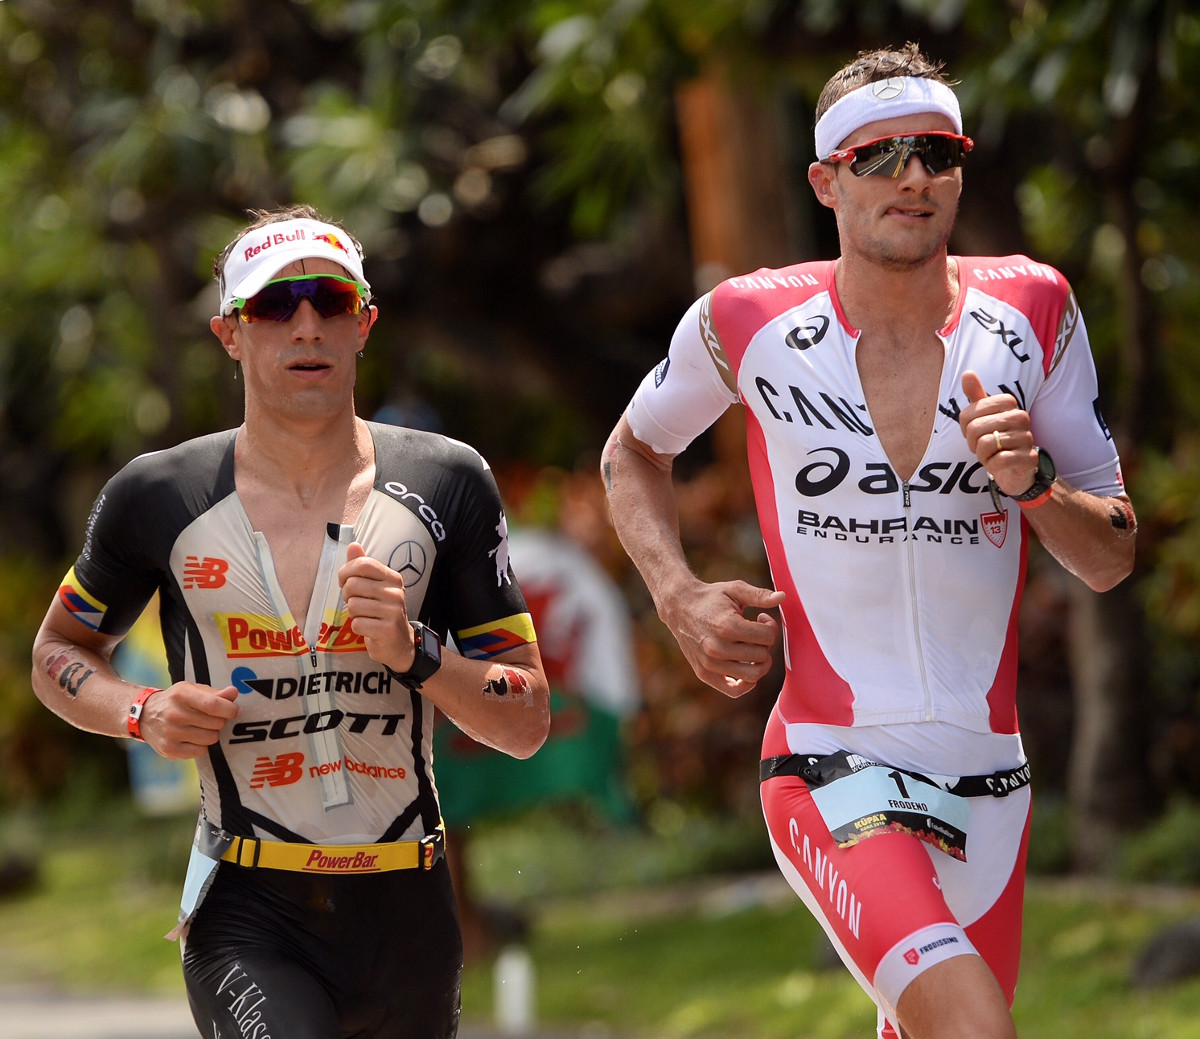 DOUBLE DEUTSCHE. German rivals Jan Frodeno #1 and Sebastian Kienle race shoulder-to-shoulder during the marathon portion of the 2016 IRONMAN World Championship triathlon on October 8, 2016 in Kailua Kona, Hawai'i. Frodeno and Kienle finished No. 1 and 2, respectively, followed by fellow countryman Patrick Lange, as Germany swept the podium for the first time in 19 years. (Photo by Donald Miralle/IRONMAN) –  Copyright © 2016 IRONMAN